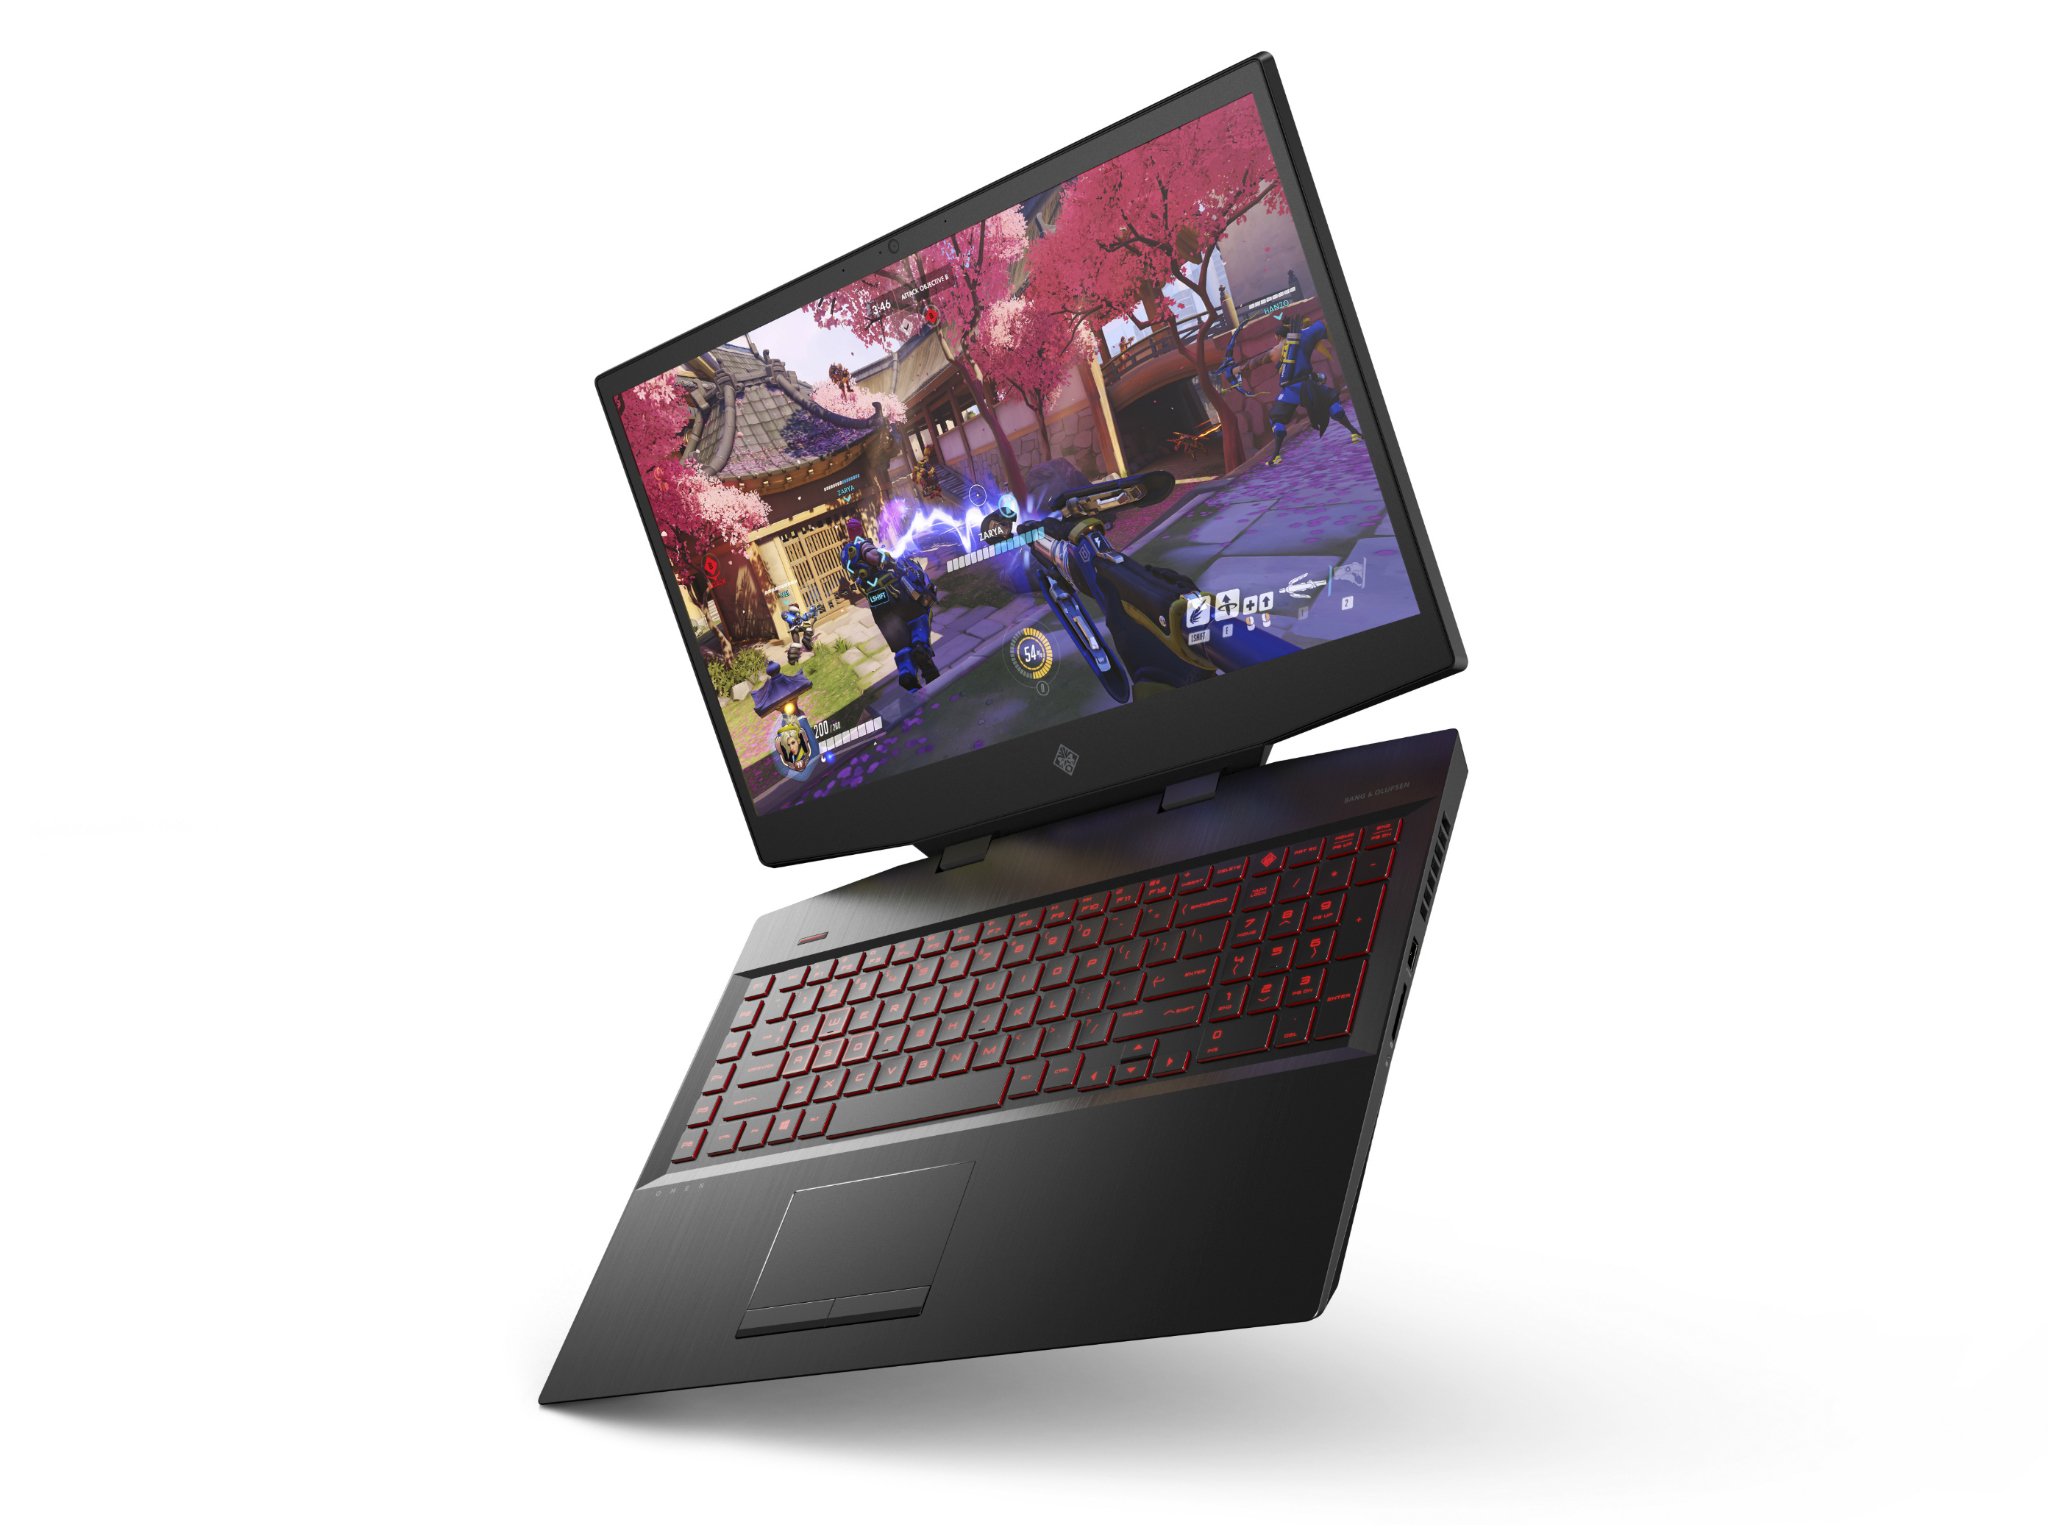 HP Omen 15 and 17 updated with 9th Gen Intel chips, GeForce RTX graphics